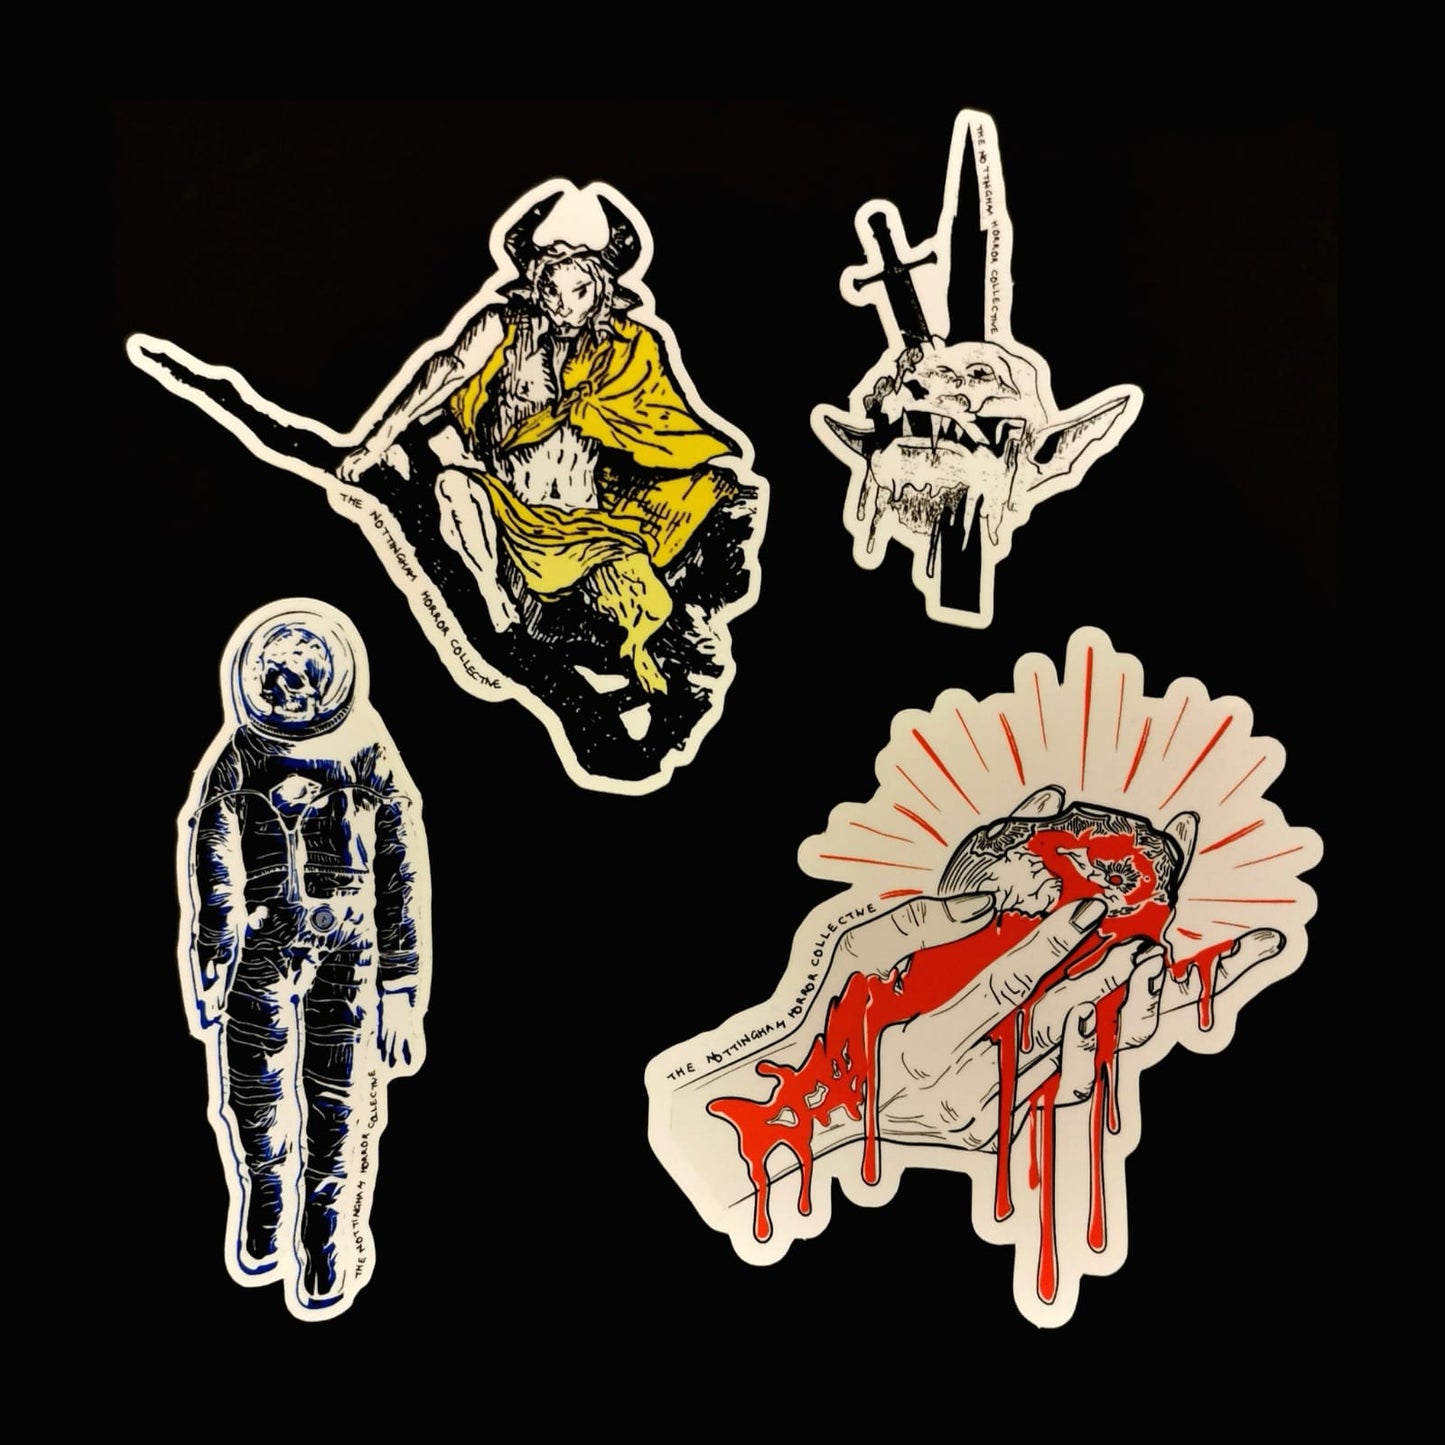 Issues I-IV Sticker Pack